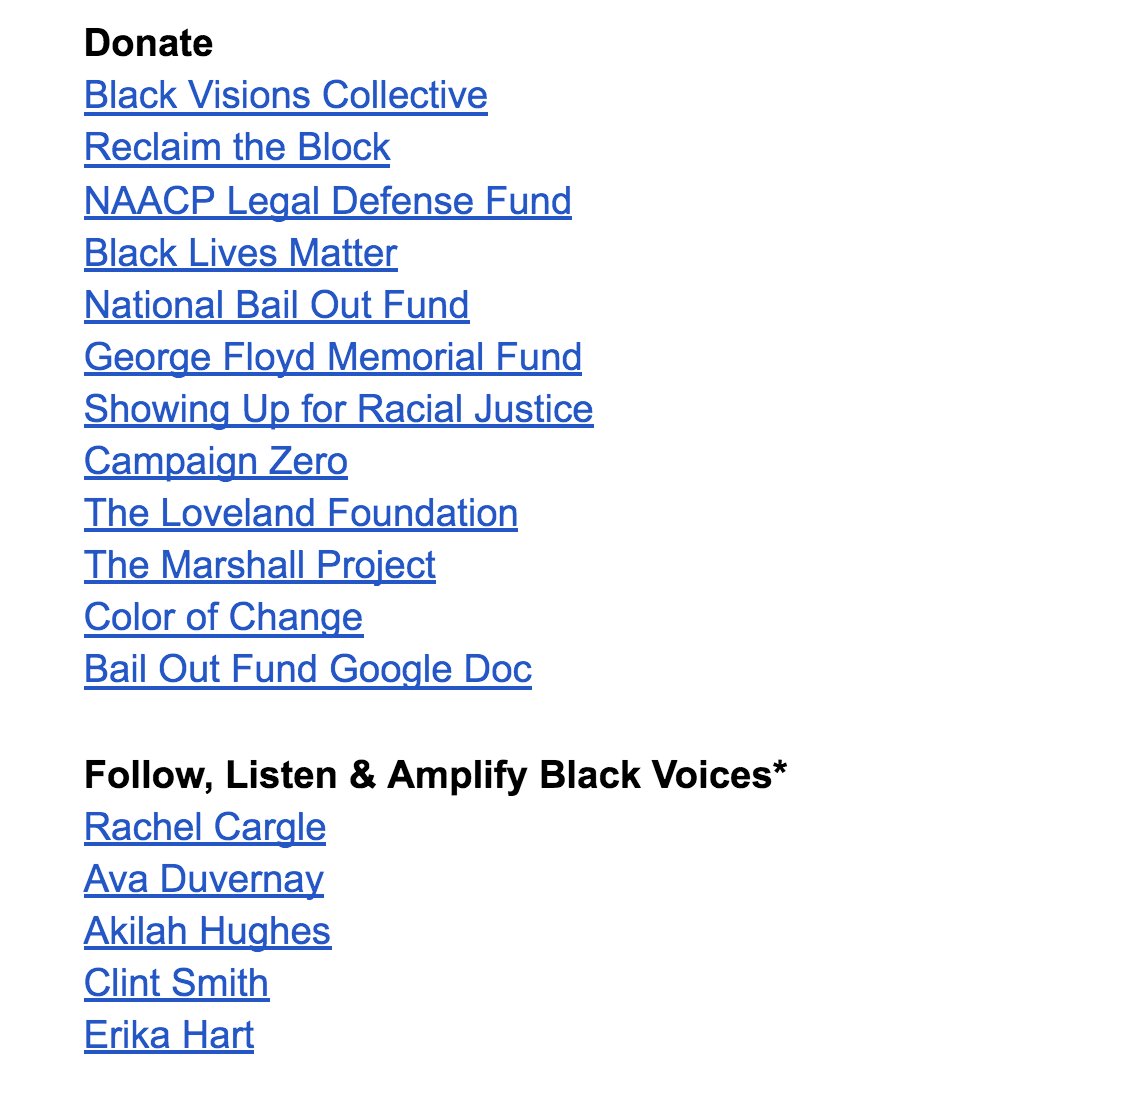 Many new resources added to the google doc. Where to donate, petition, black artists / activists / designers to amplify, back restaurants and shops, etc: docs.google.com/document/d/1zh…